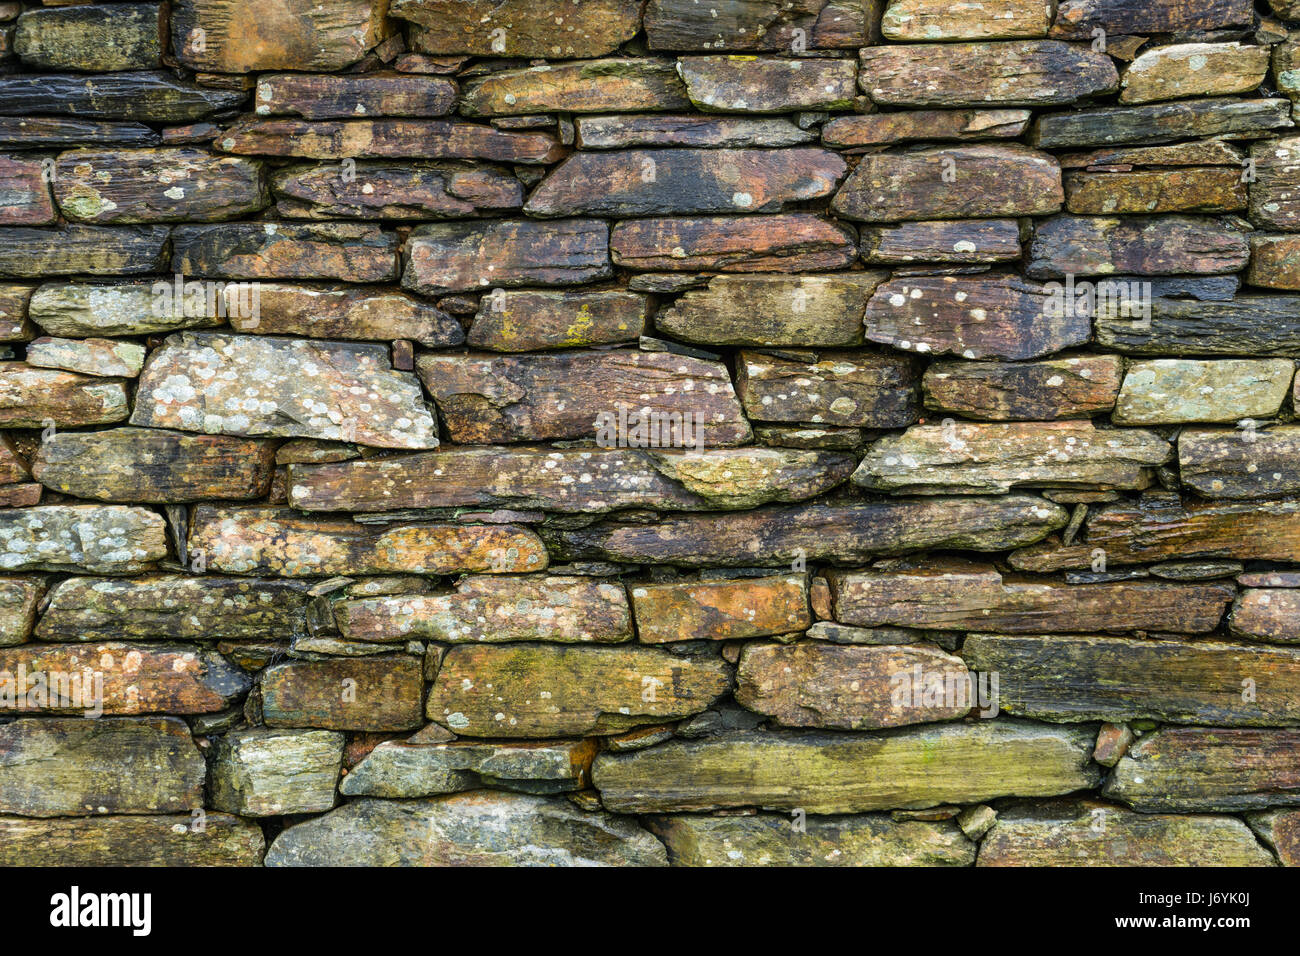 Dry stone, also called Drystack, is a building method by which structures are built from stones without the use of mortar to bind them together. Stock Photo